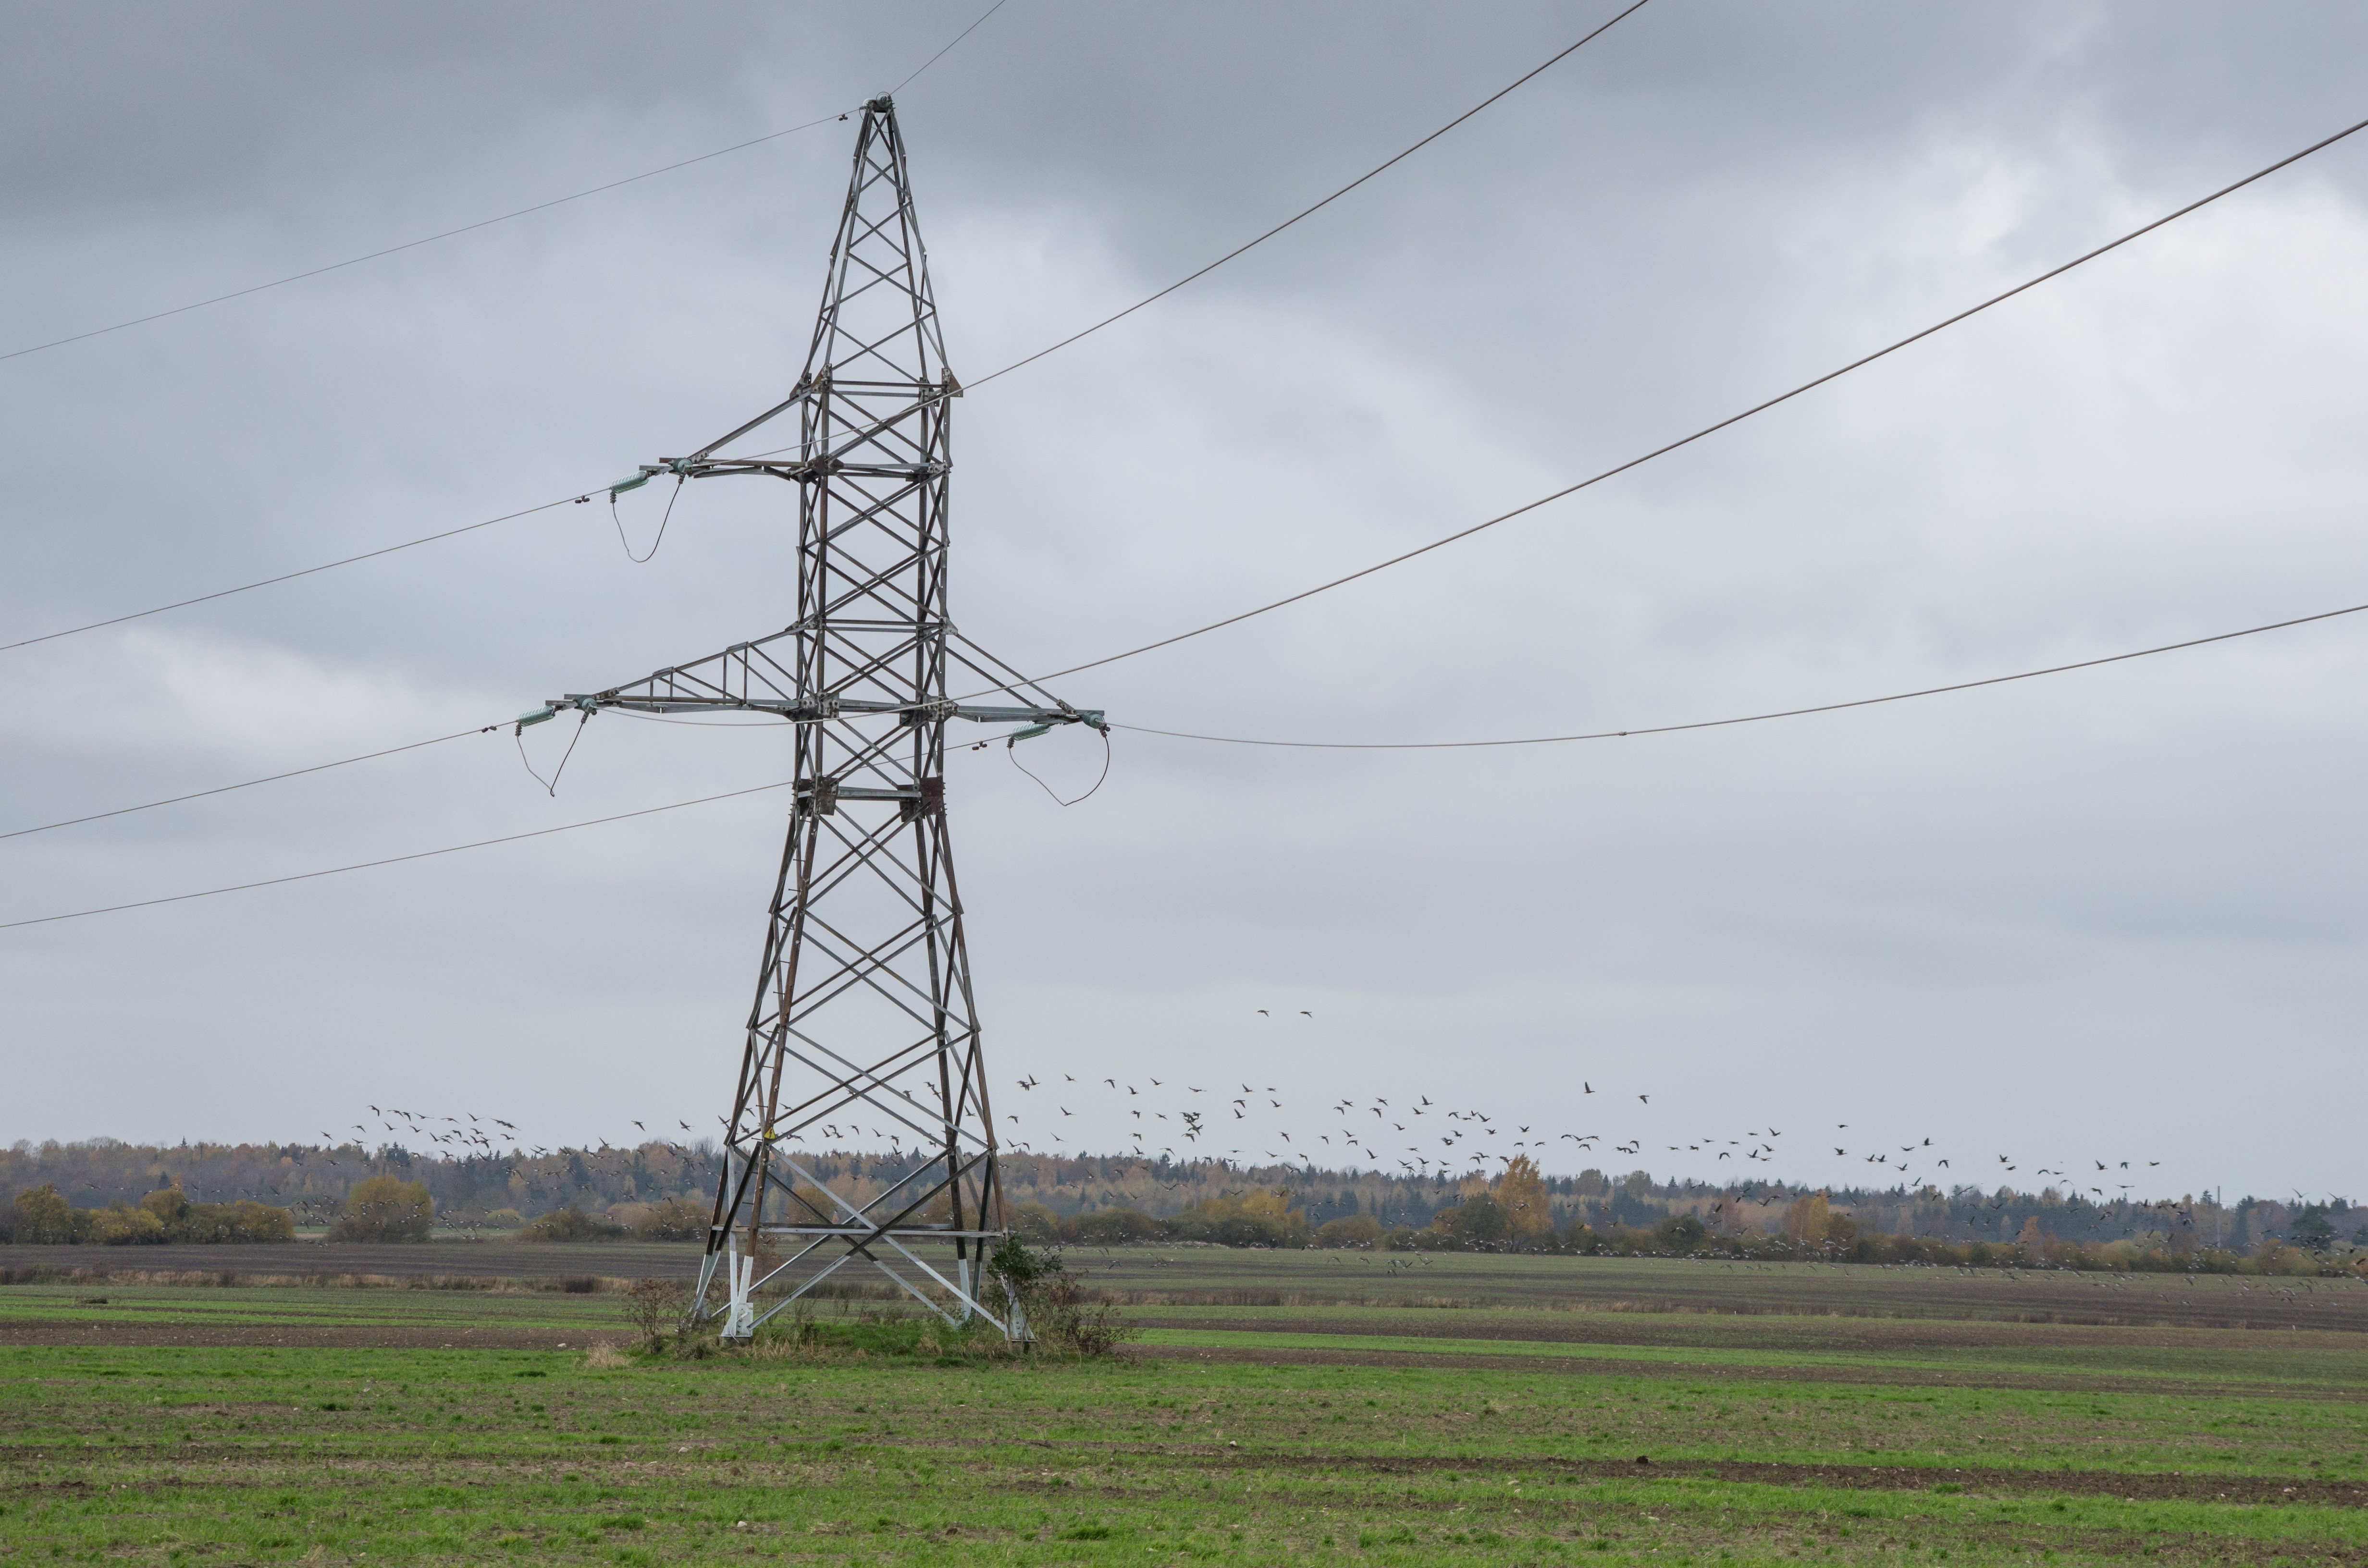 Dead birds were found during monitoring of electricity lines 